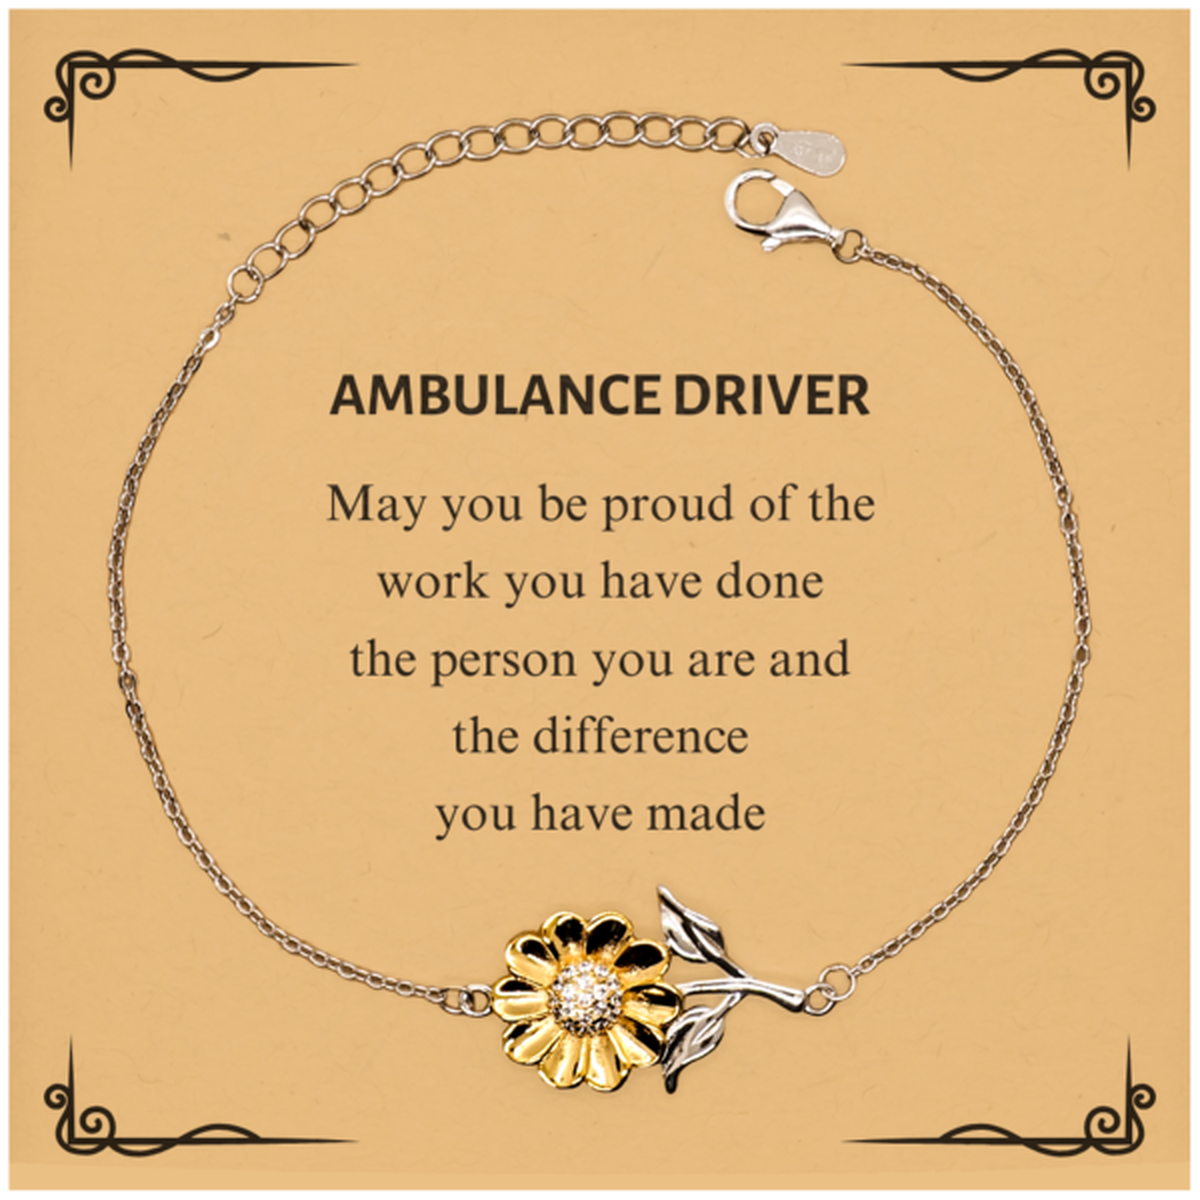 Ambulance Driver May you be proud of the work you have done, Retirement Ambulance Driver Sunflower Bracelet for Colleague Appreciation Gifts Amazing for Ambulance Driver